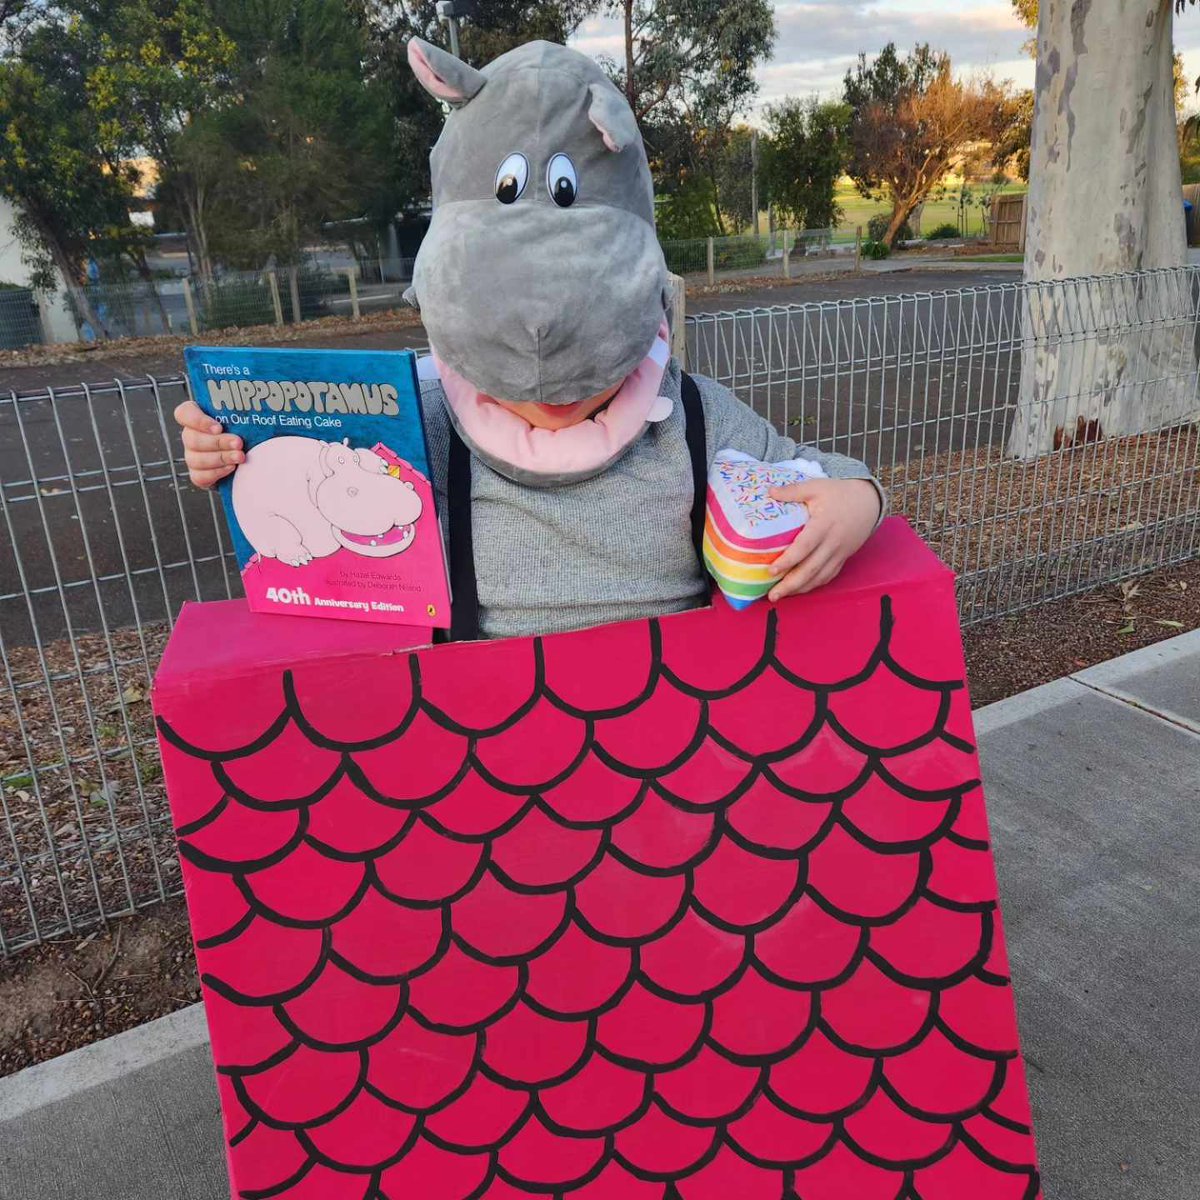 One of the joys of being a children's author is when children choose your books for Book Week outfits. Here's to imaginative parents interstate (This is from Tasmania) & internationally who read to their families and who benefit from the fun of sharing books.Hippo is now 43!